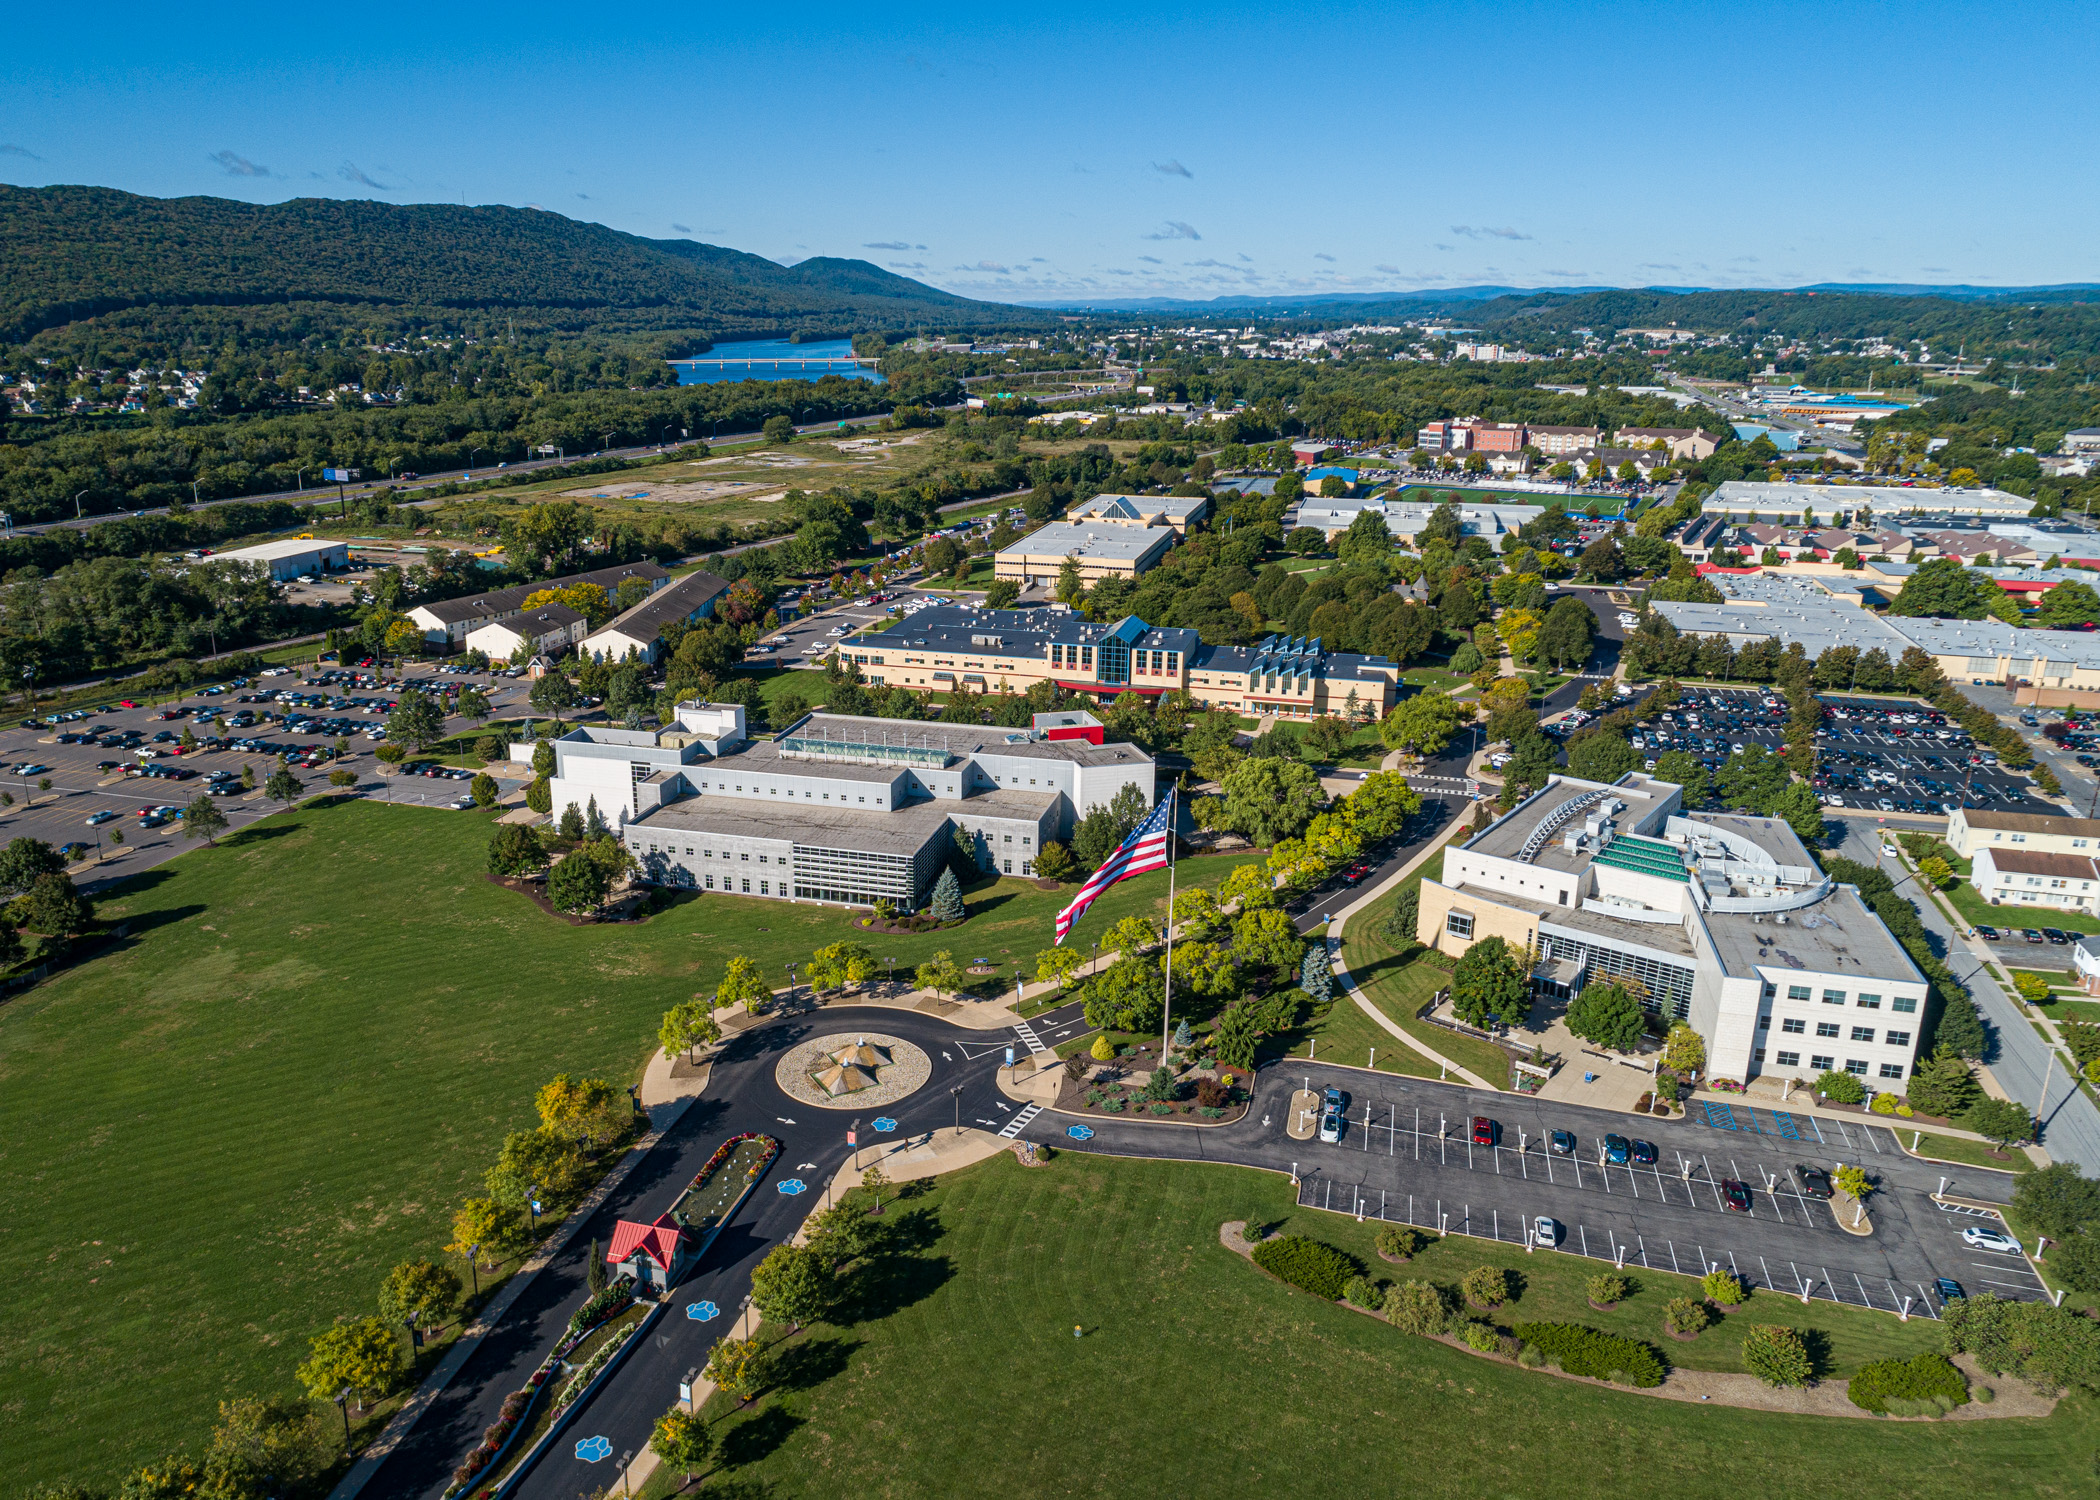 An aerial view of Pennsylvania College of Technology's main campus.